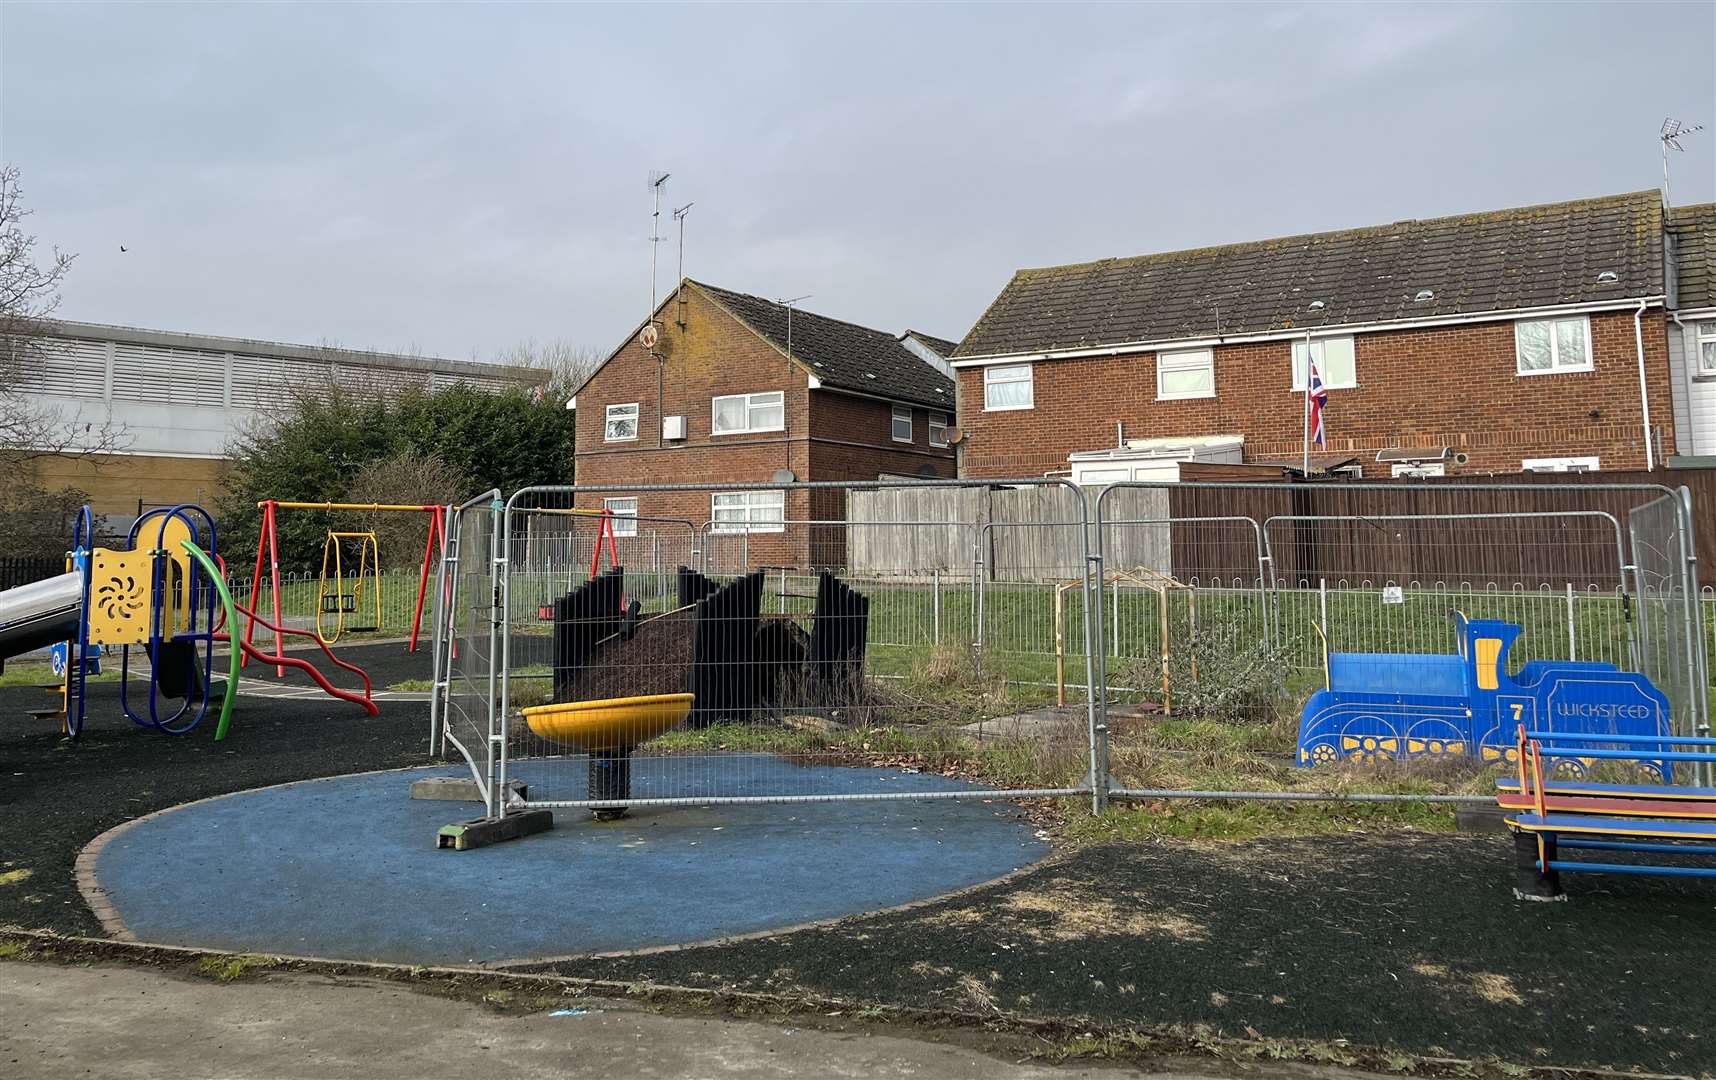 The damaged equipment remains in the play park